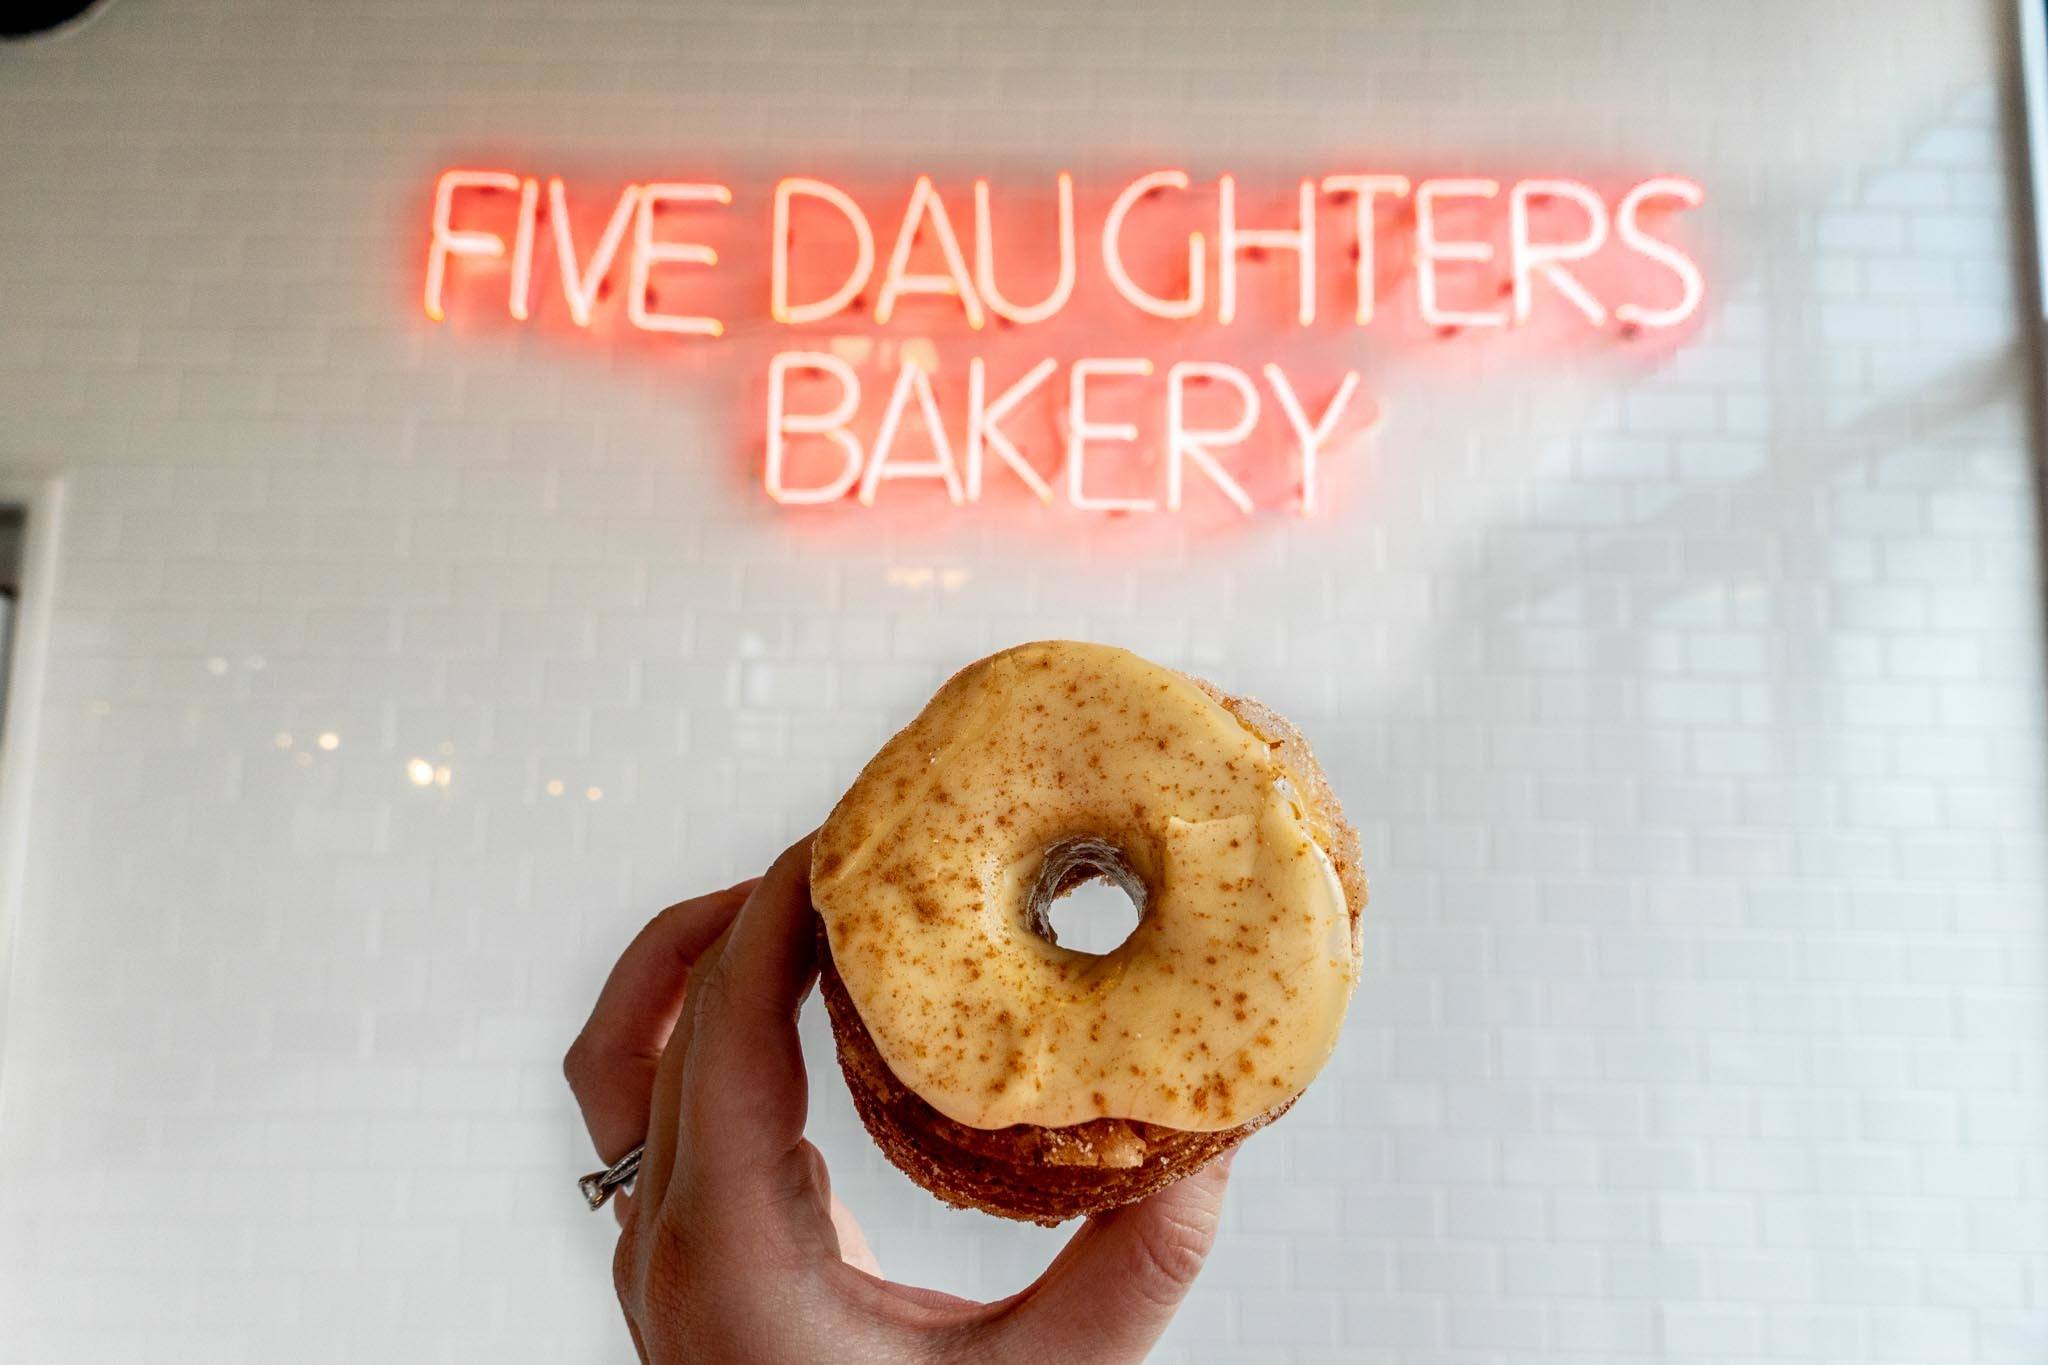 Maple glazed donut under the illuminated Five Daughters Bakery sign